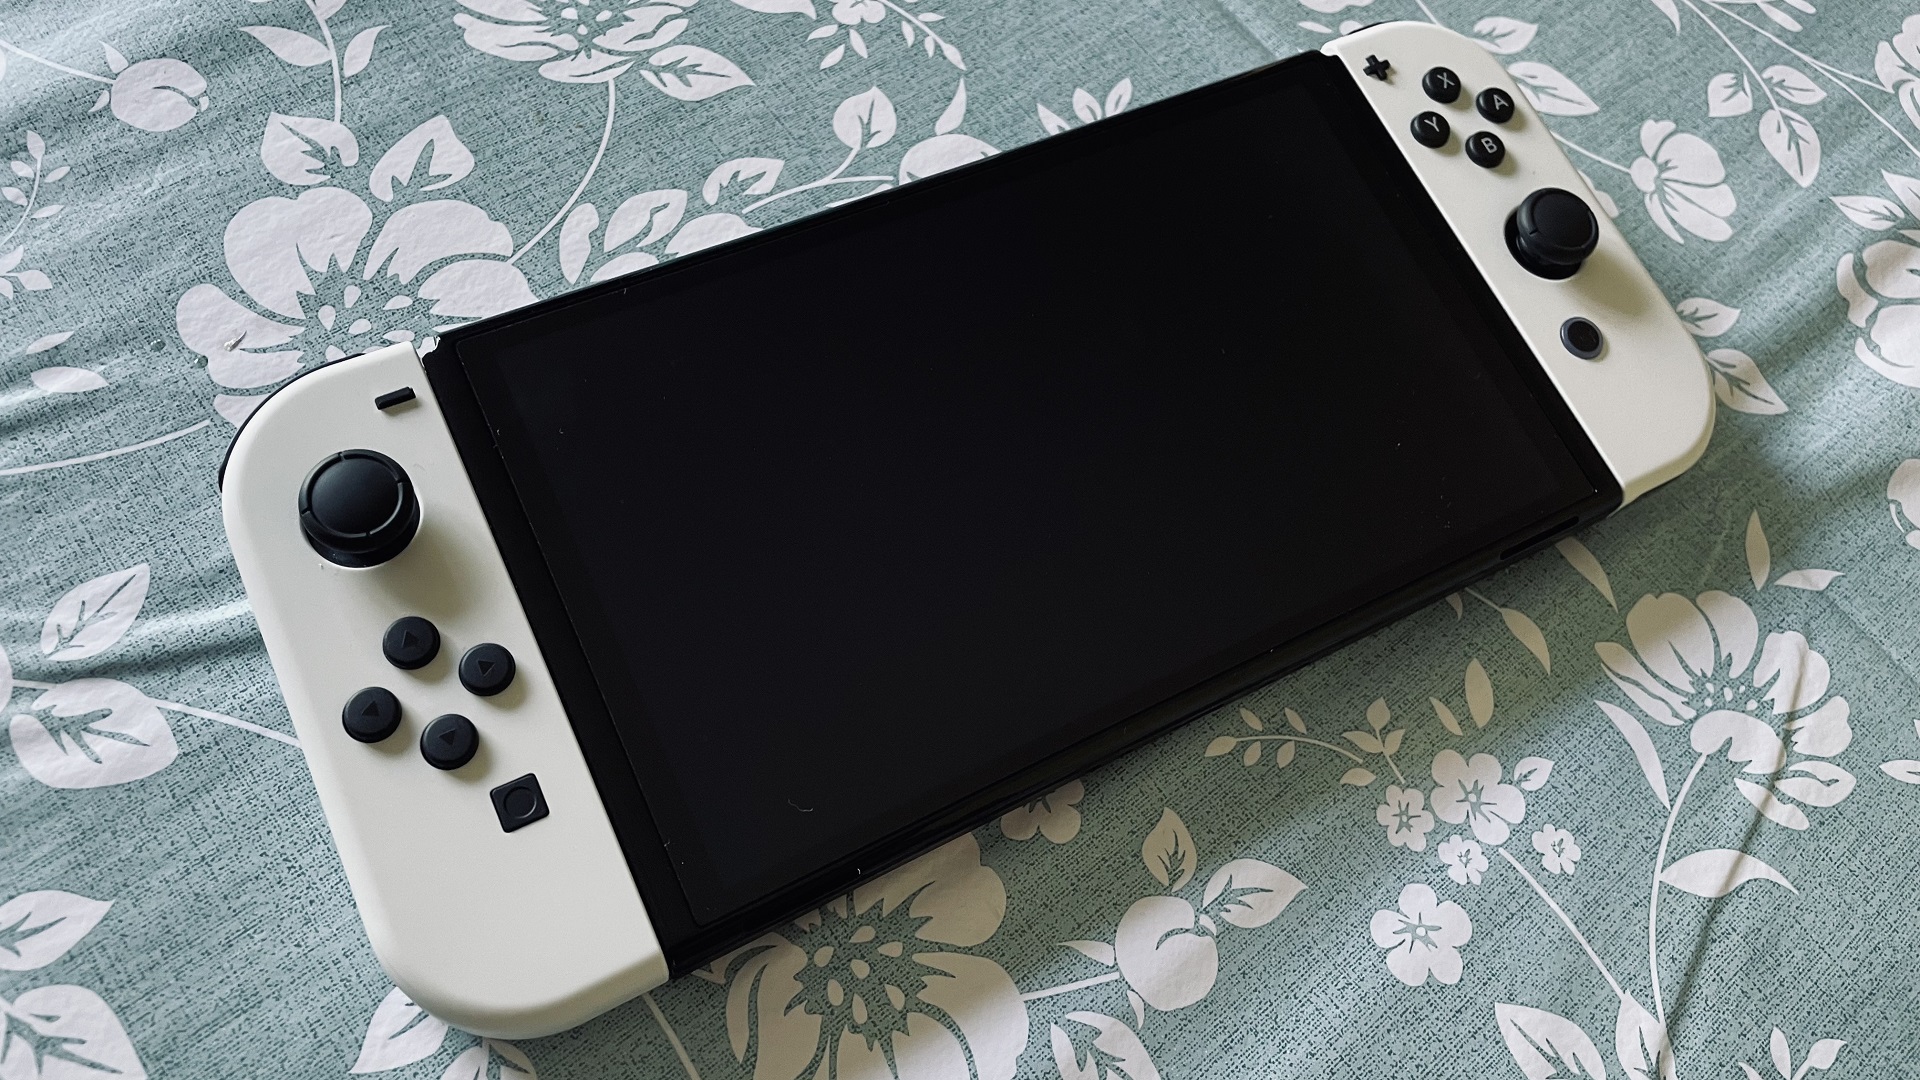 Nintendo Switch OLED Model review: an excellent premium upgrade